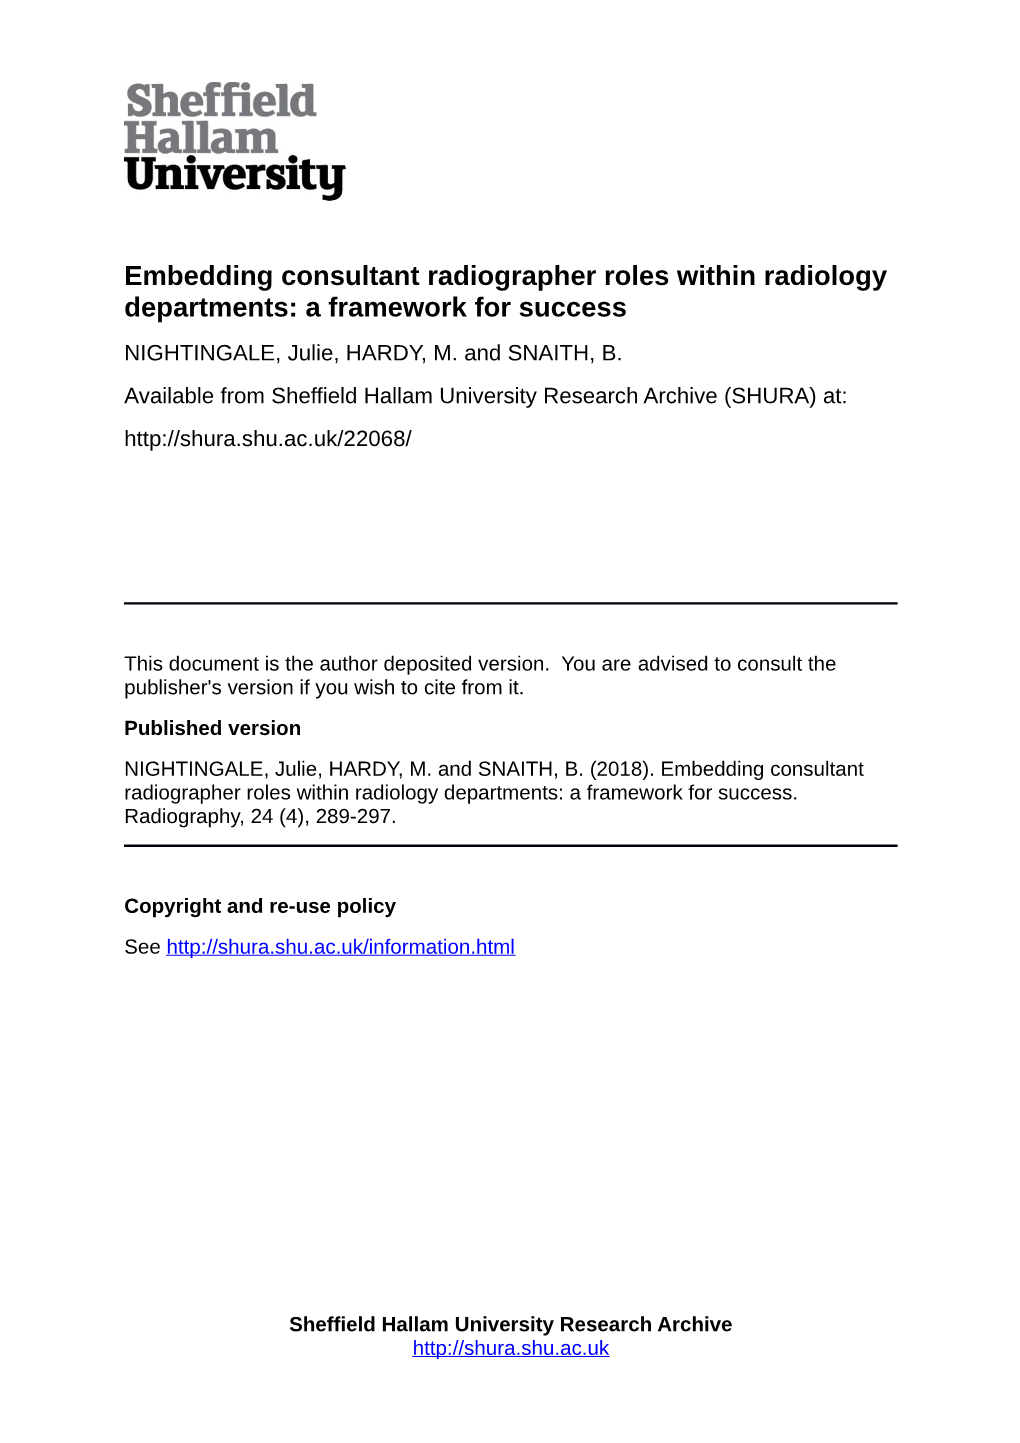 Embedding Consultant Radiographer Roles Within Radiology Departments: a Framework for Success NIGHTINGALE, Julie, HARDY, M